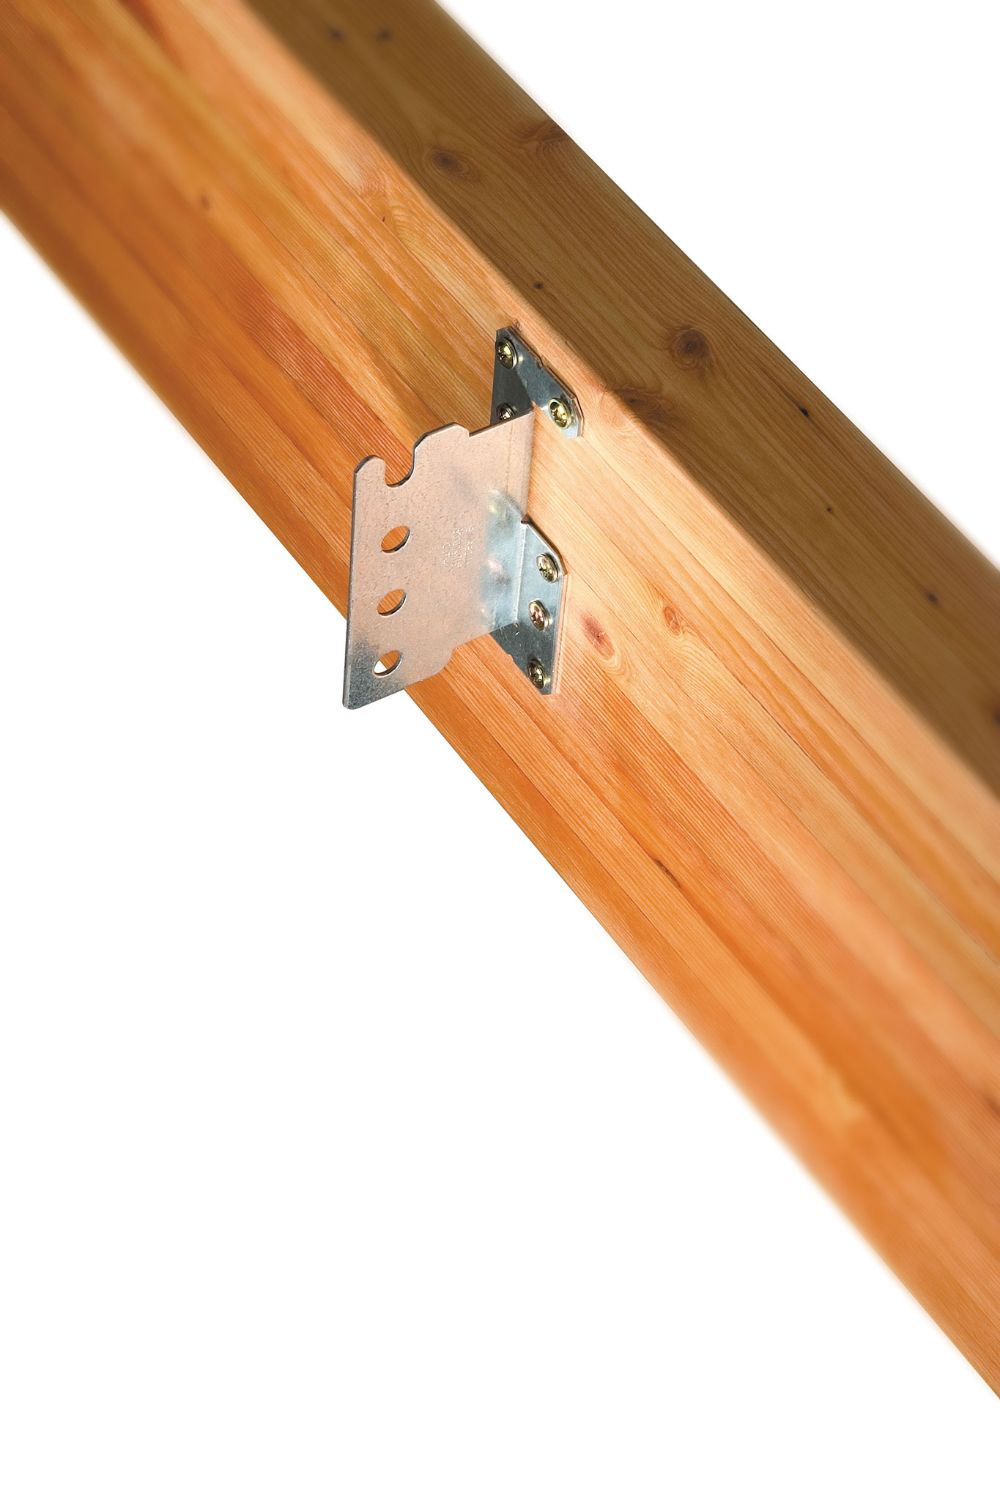 Simpson CJT6ZS Concealed Joist Tie w Short Pins ZMAX Finish image 2 of 5